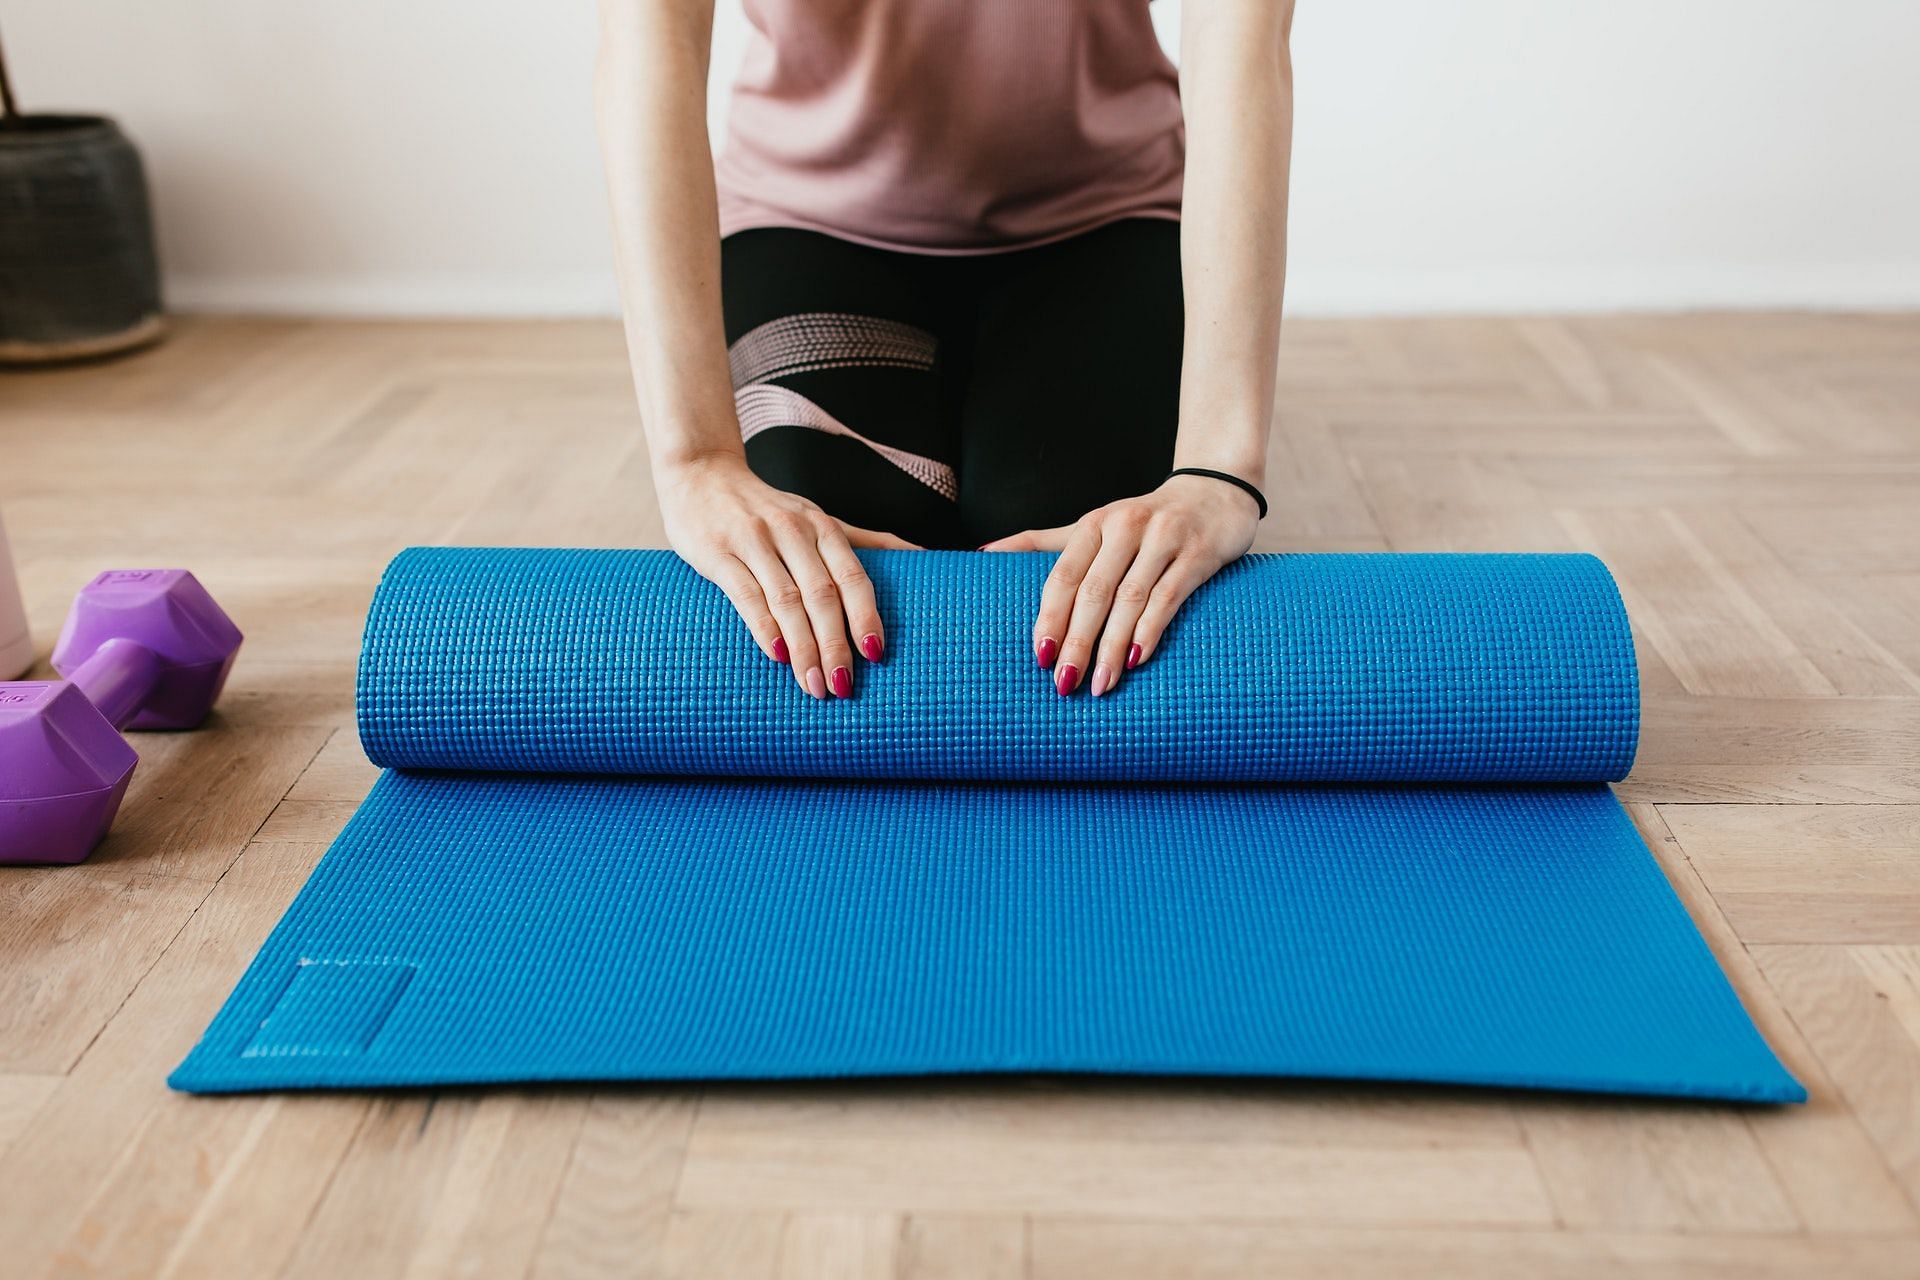 Pilates mat exercises for the lower body are a great way to strengthen some major muscles. (Photo by Karolina Grabowska via pexels)